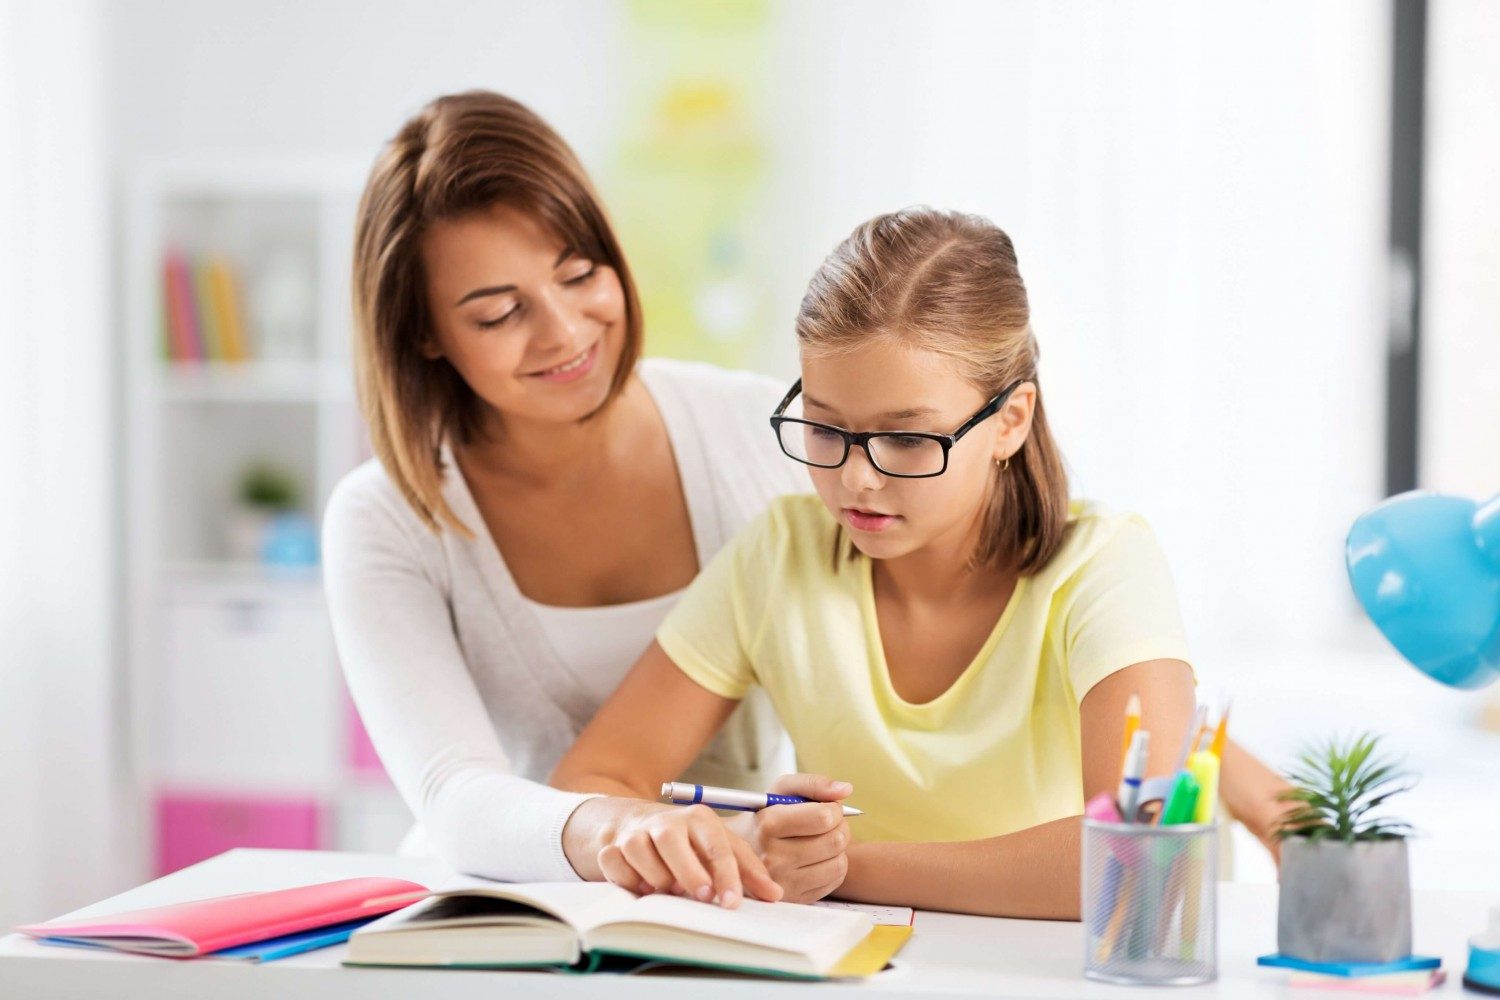 Why seek at home education for your child?